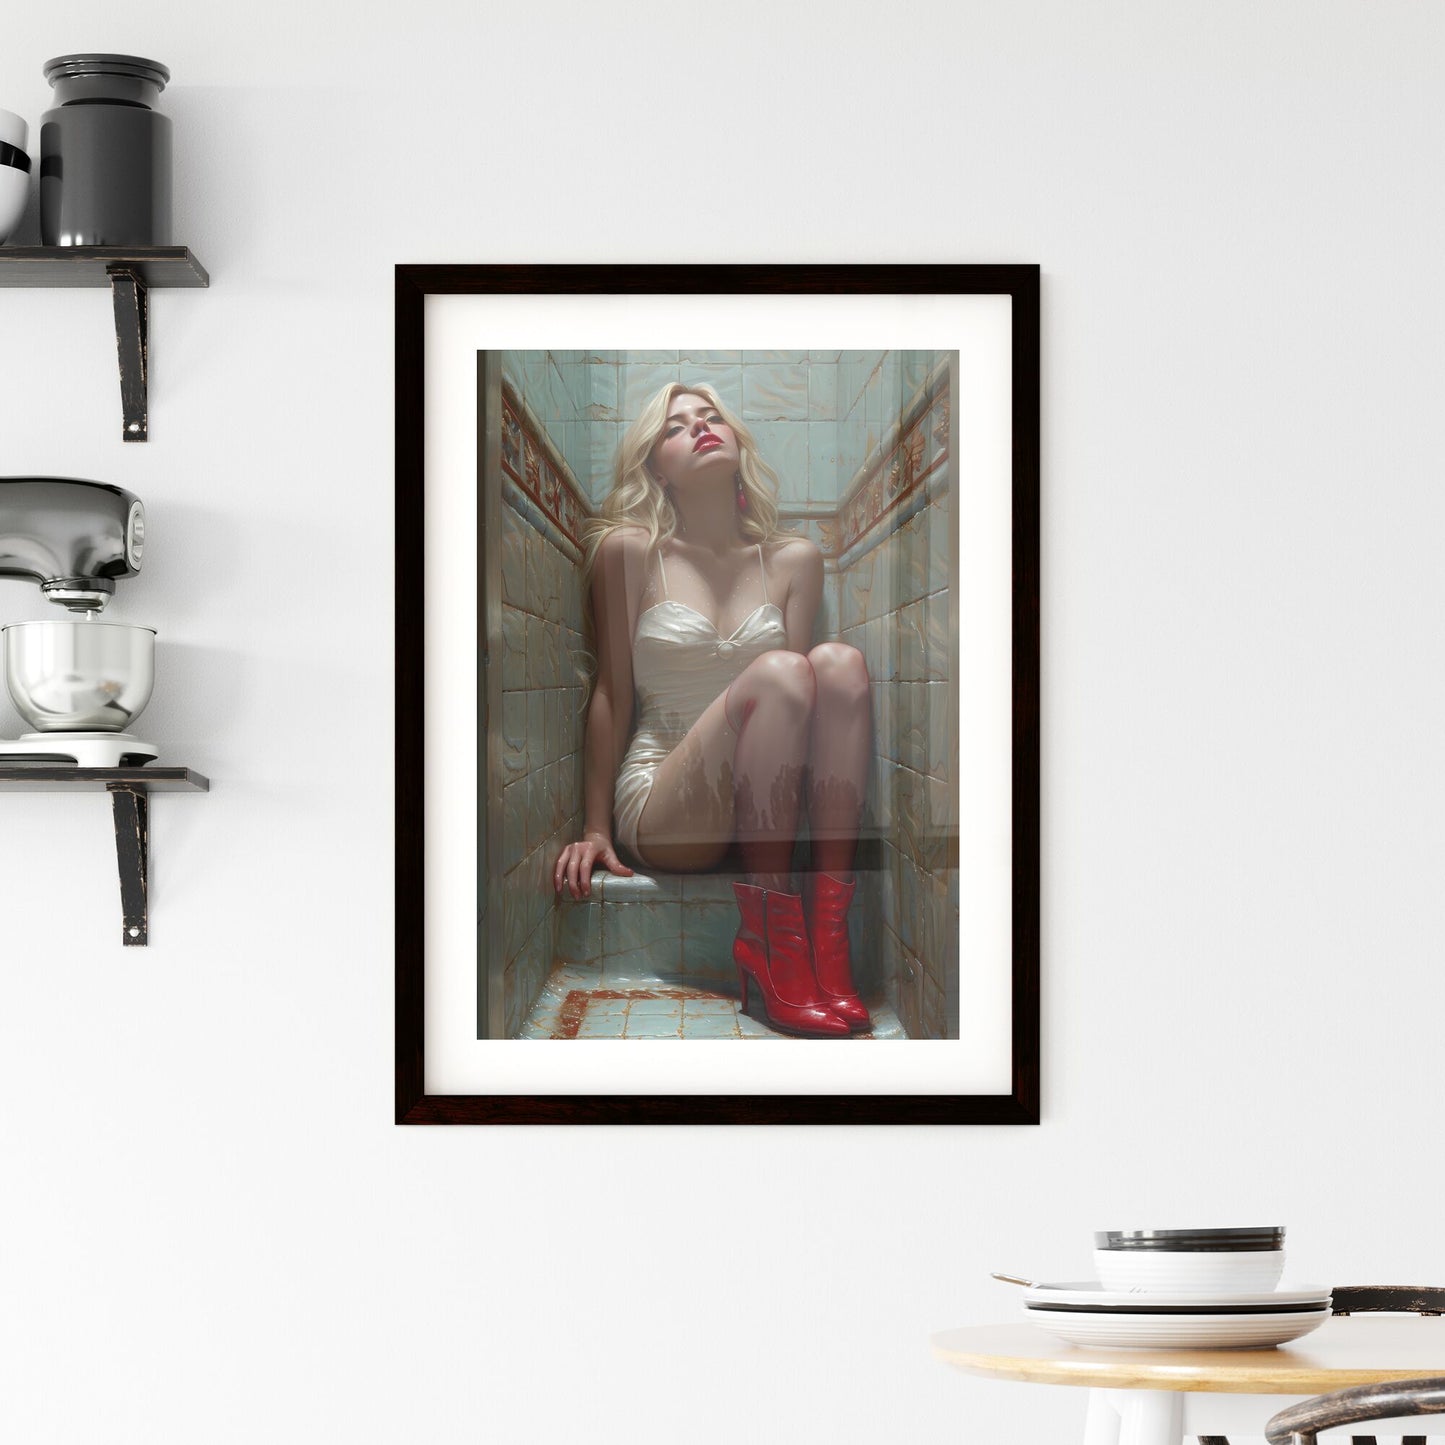 Blonde pin up girl in stockings with red high heels aviation style - Art print of a woman sitting on a tile floor Default Title